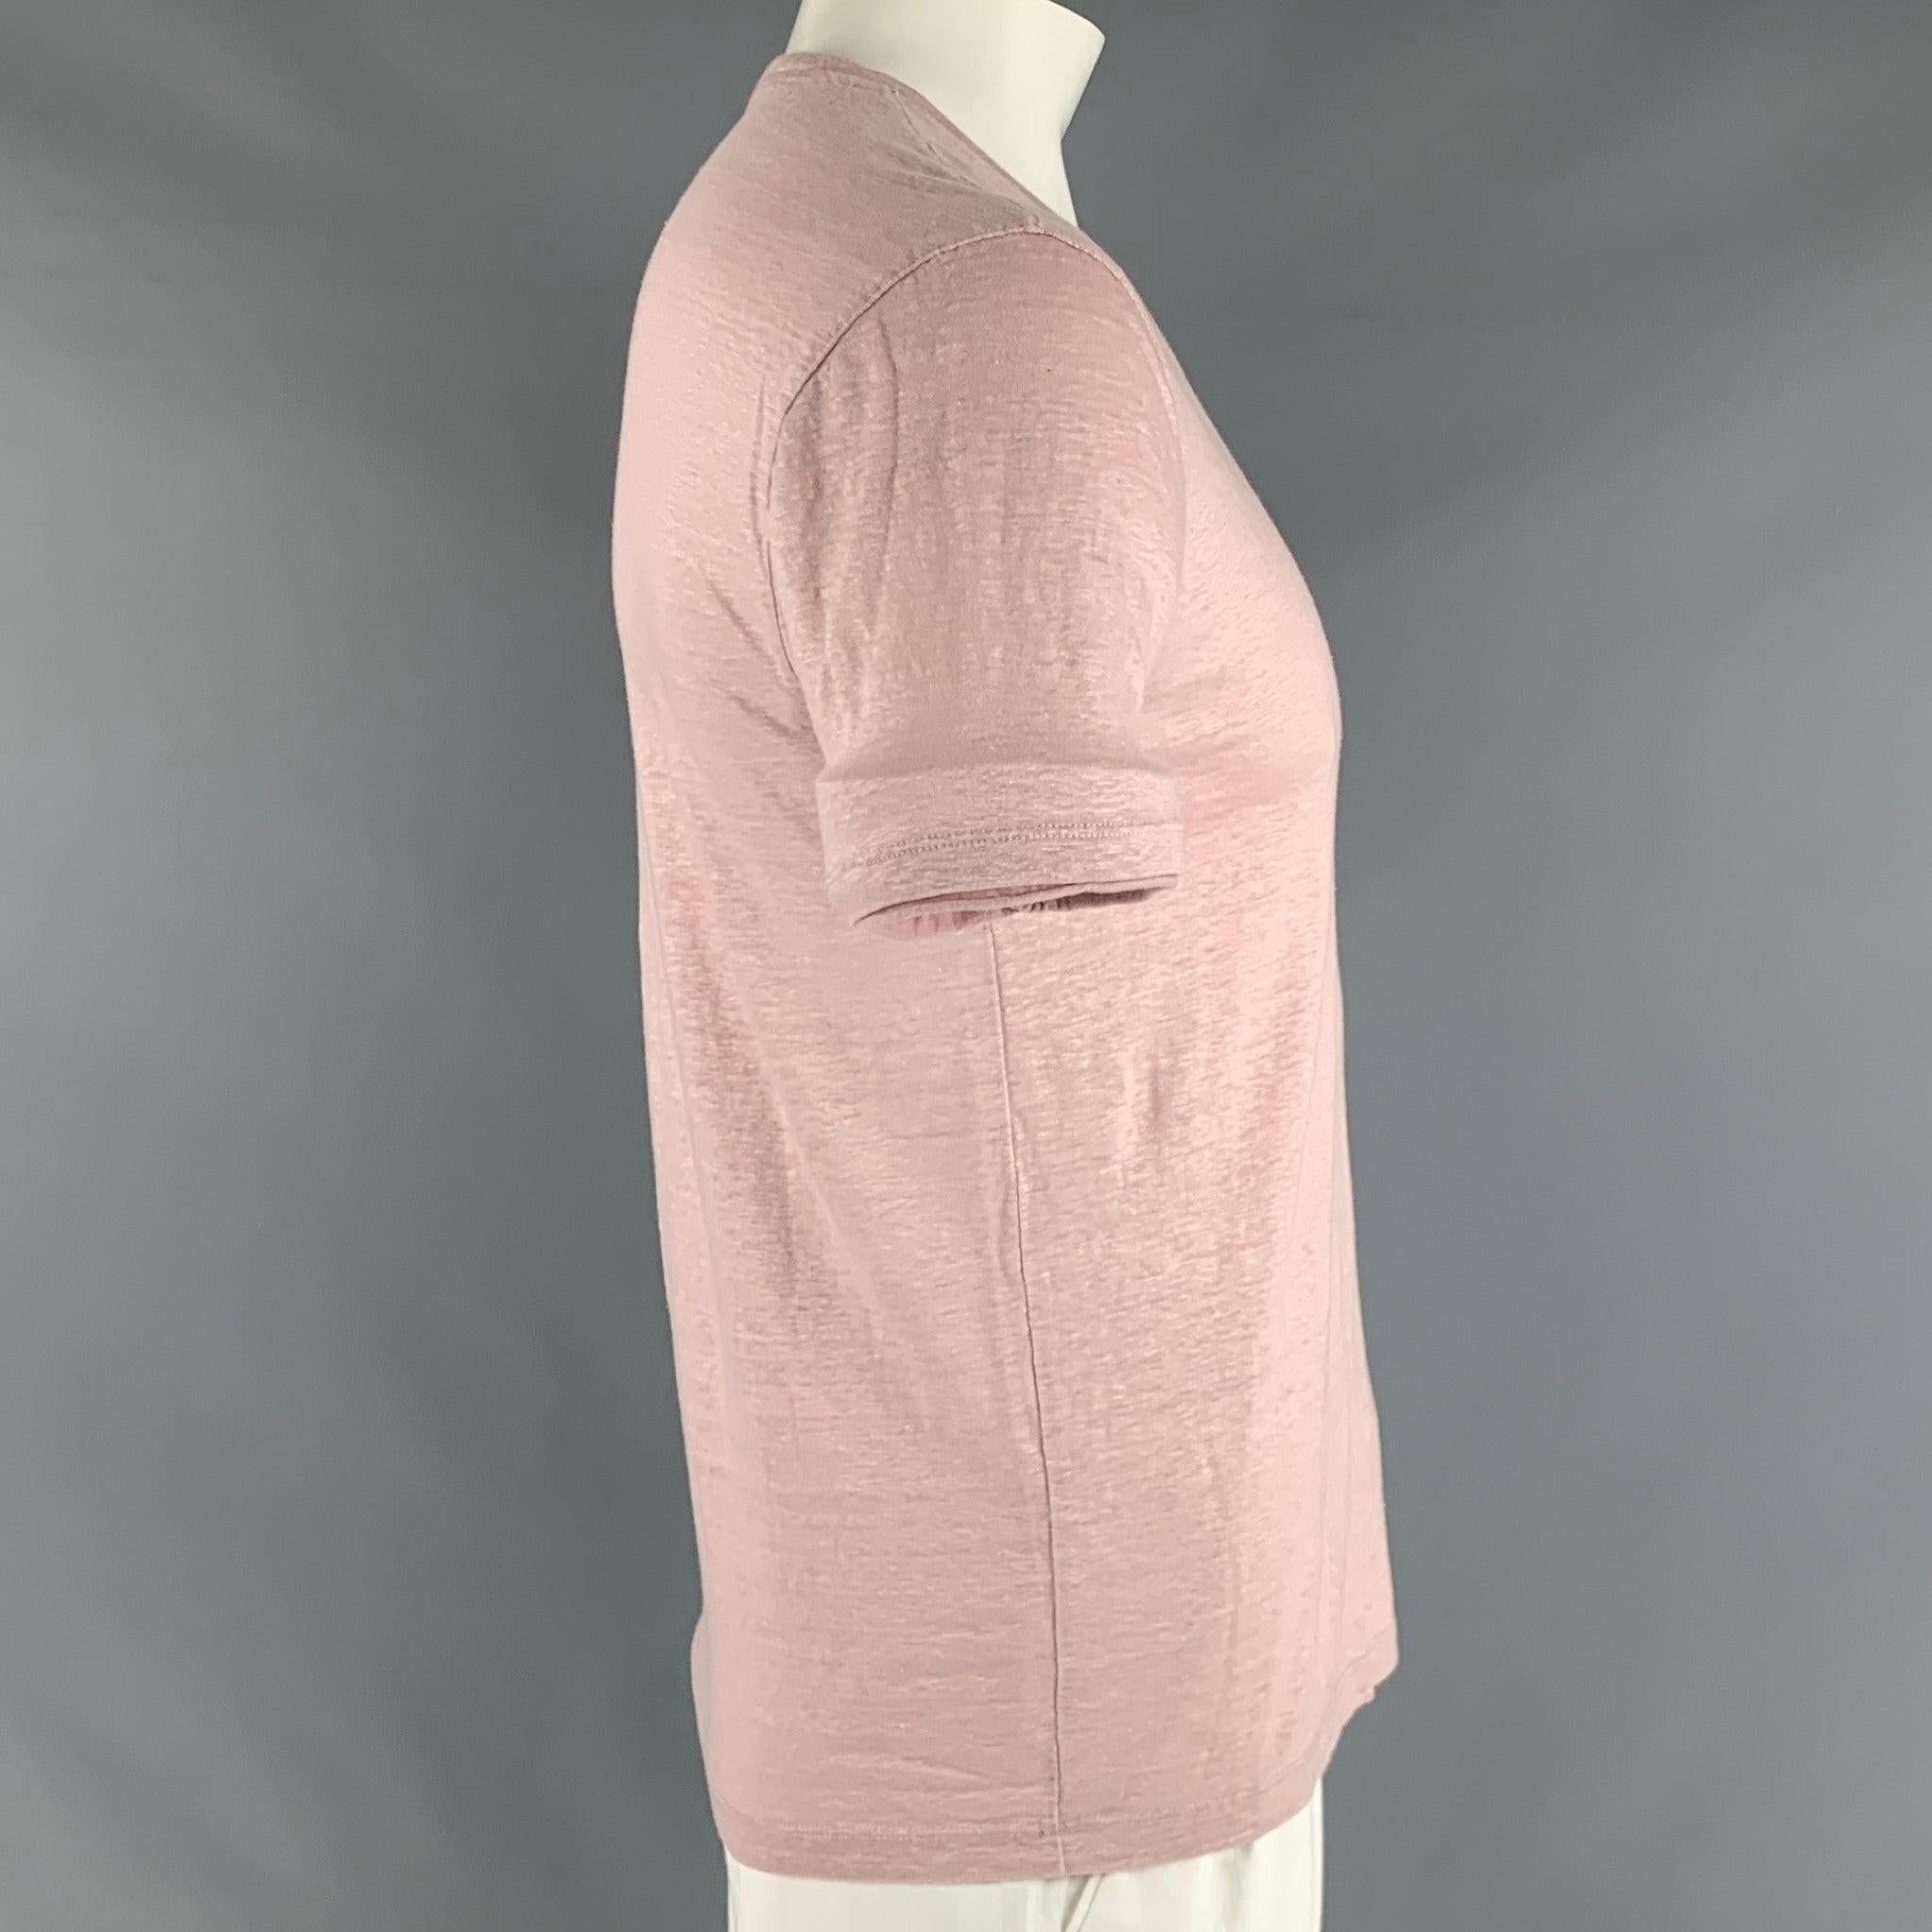 JOHN VARVATOS T-Shirt comes in pink heather linen jersey fabric with a V-neck.Excellent Pre-Owned Condition. 

Marked:   L 

Measurements: 
 
Shoulder: 18.5 inches Chest: 45 inches Sleeve: 8.5 inches Length: 26 inches  
  
  
 
Reference: